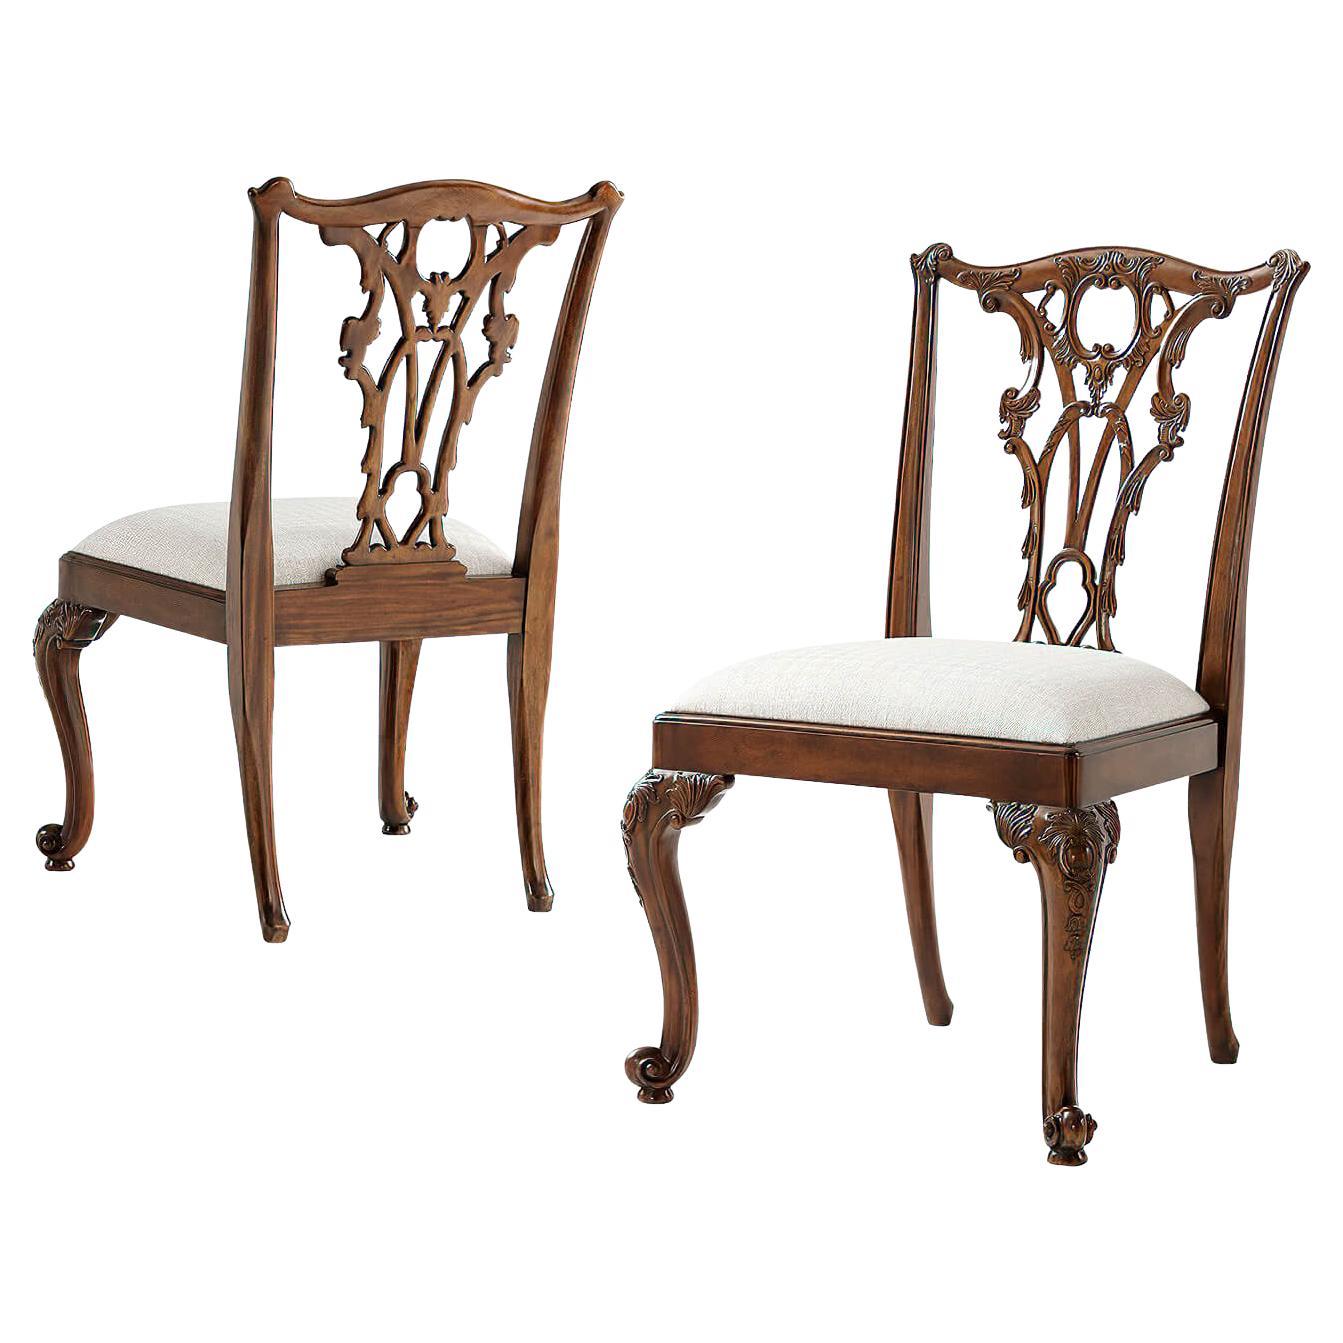 George II Chippendale Style Dining Chair